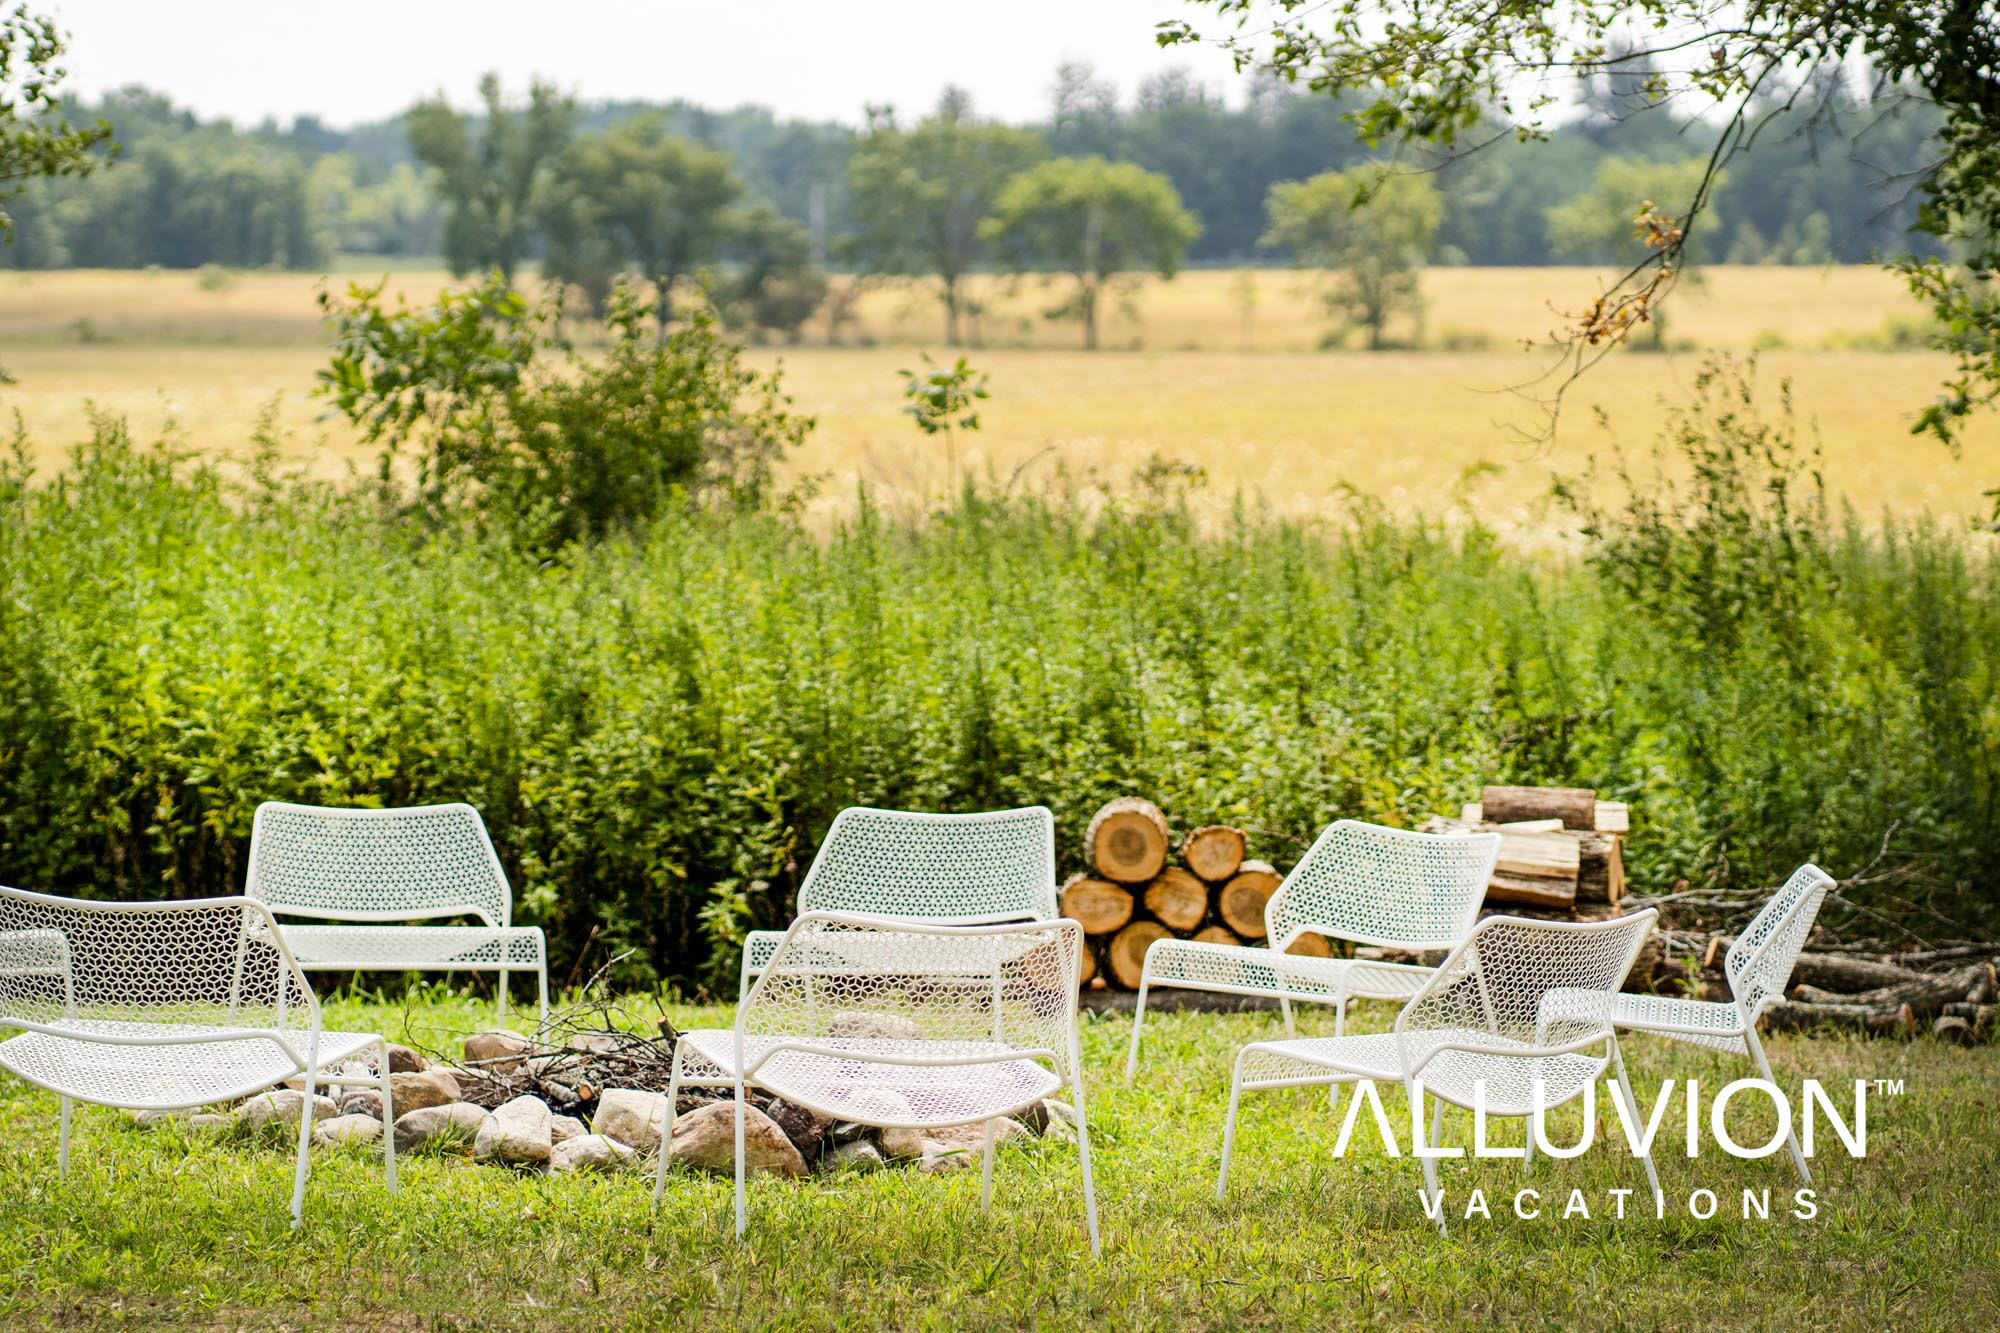 Experience the Magic of Hudson Valley with Alluvion Vacations – Luxury Airbnb Villa in the heart of Hudson Valley Farmland – Airbnb Photography by Alluvion Media / Maxwell Alexander – Vacation Rental Management by Alluvion Vacations